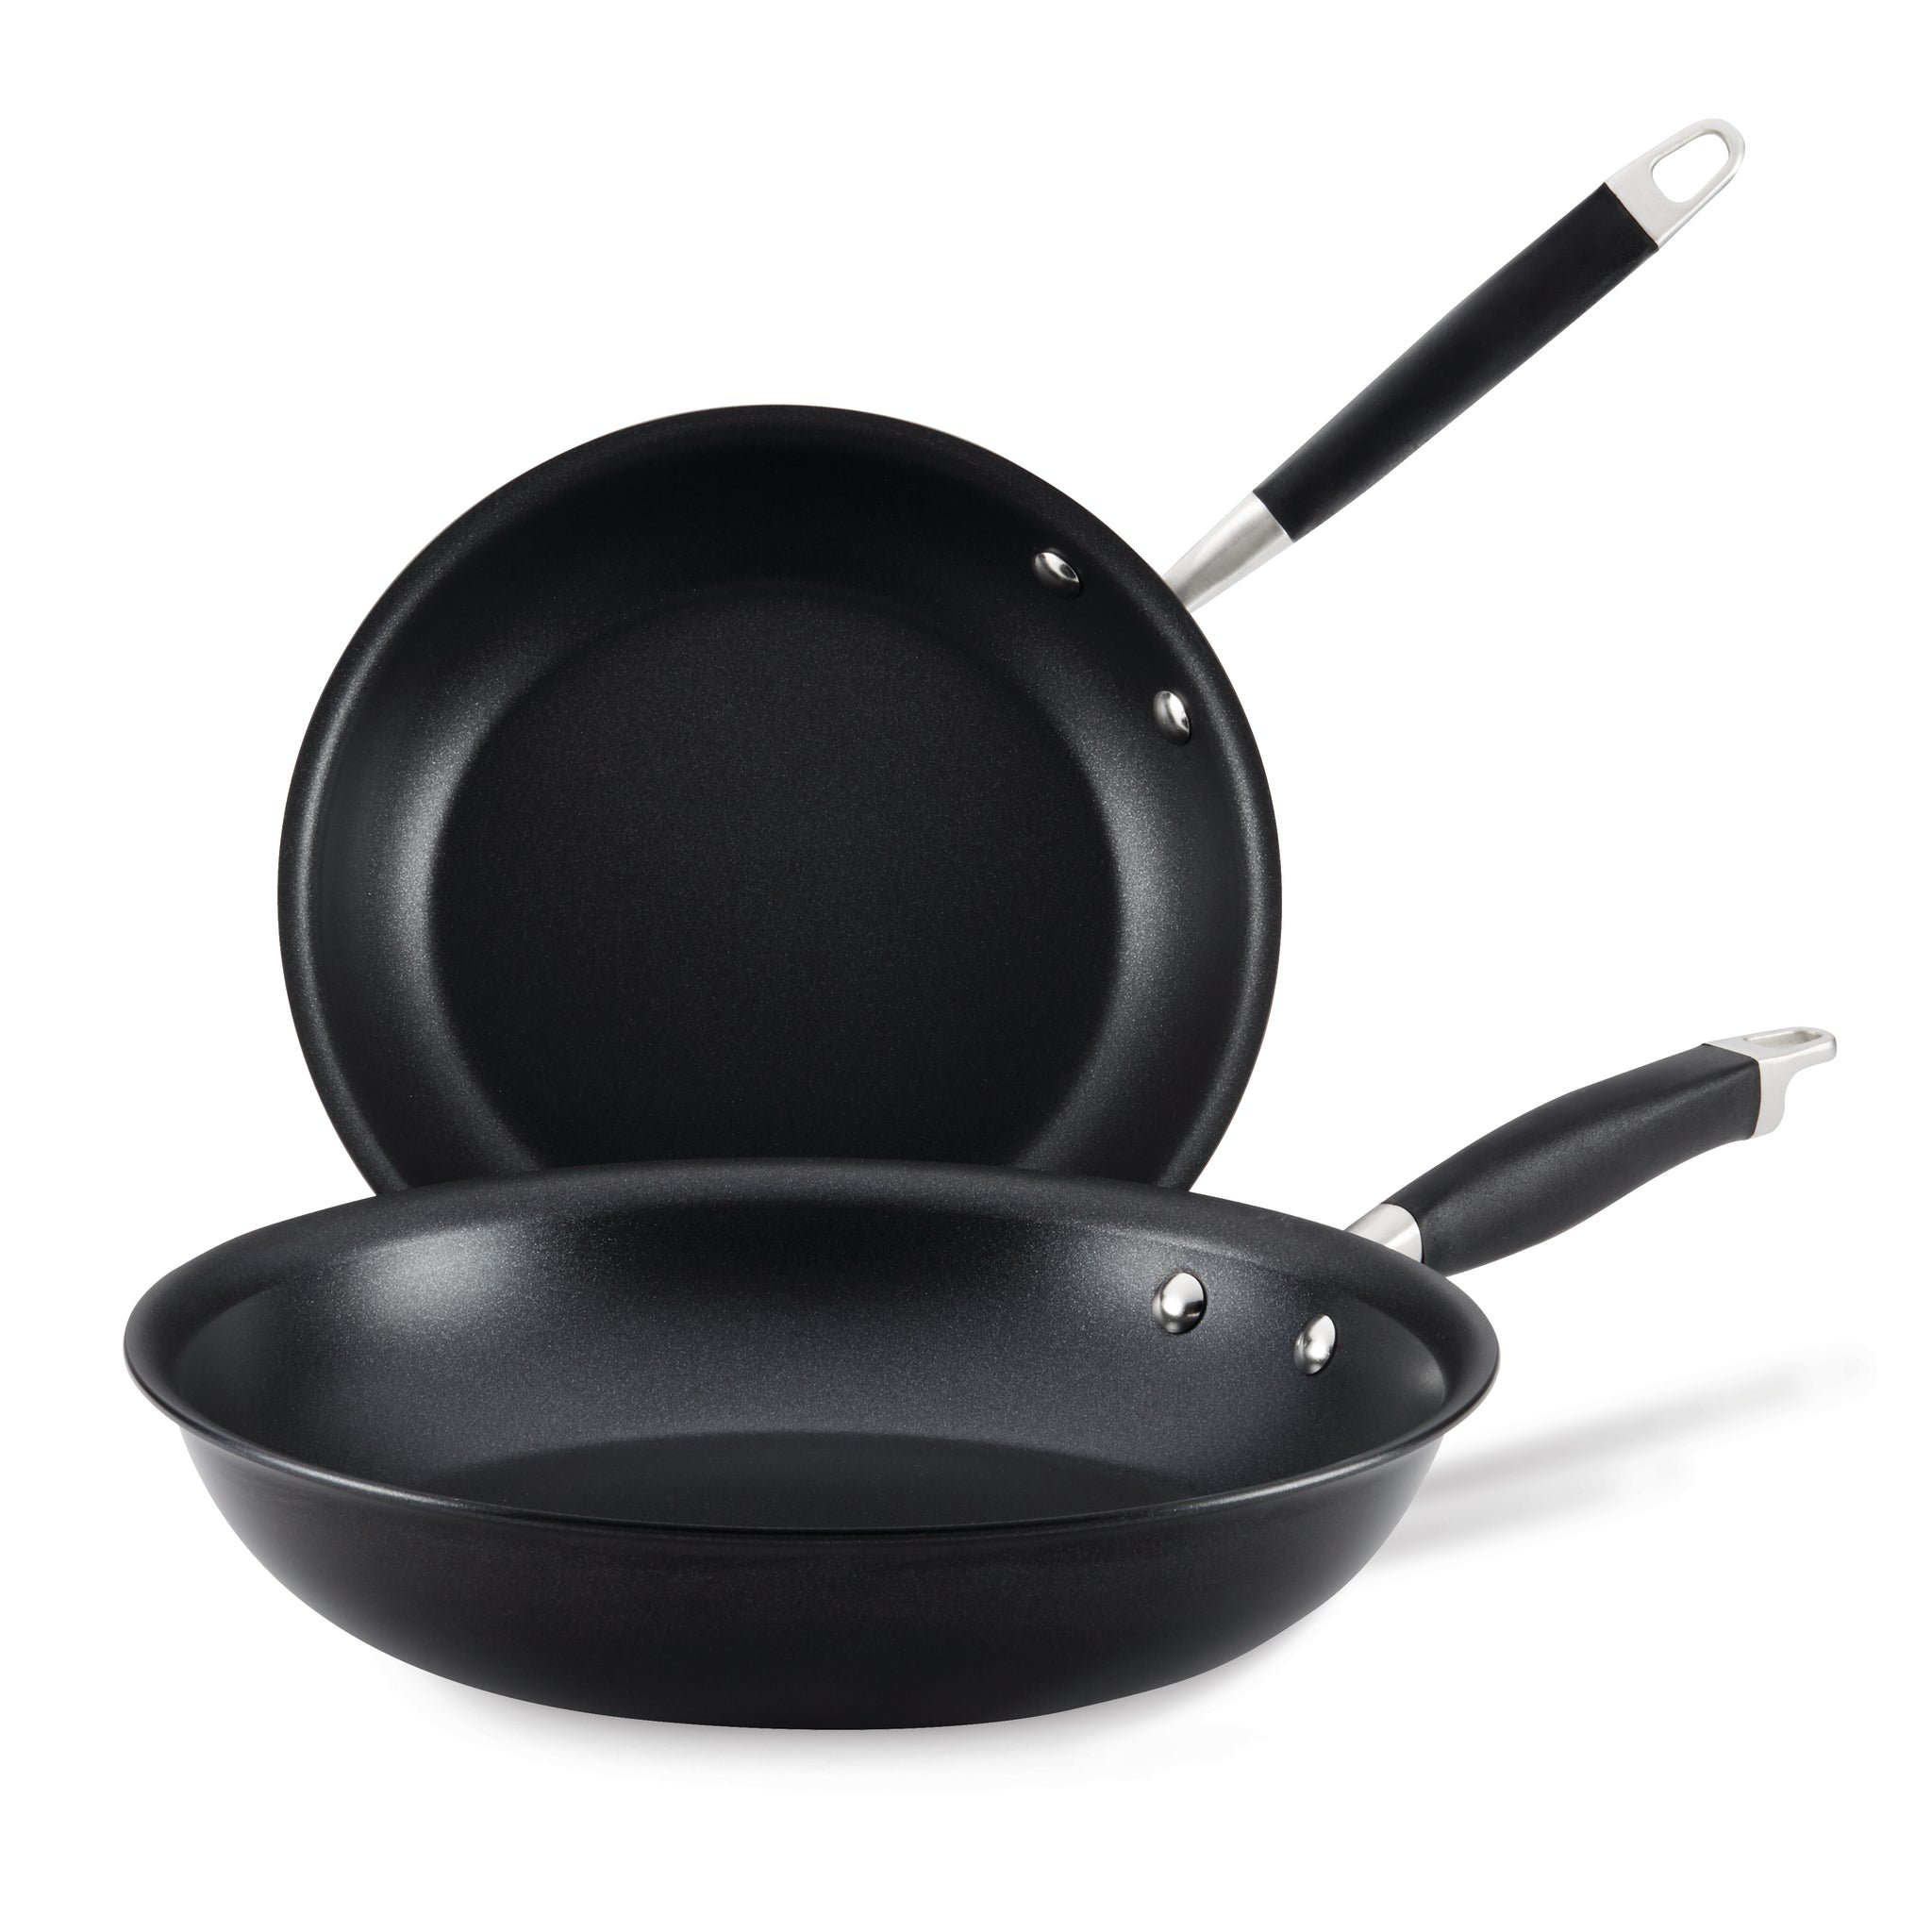 Cuisinart Hard-Anondized 12-Inch Skillet and 10-Inch Skillet Bundle